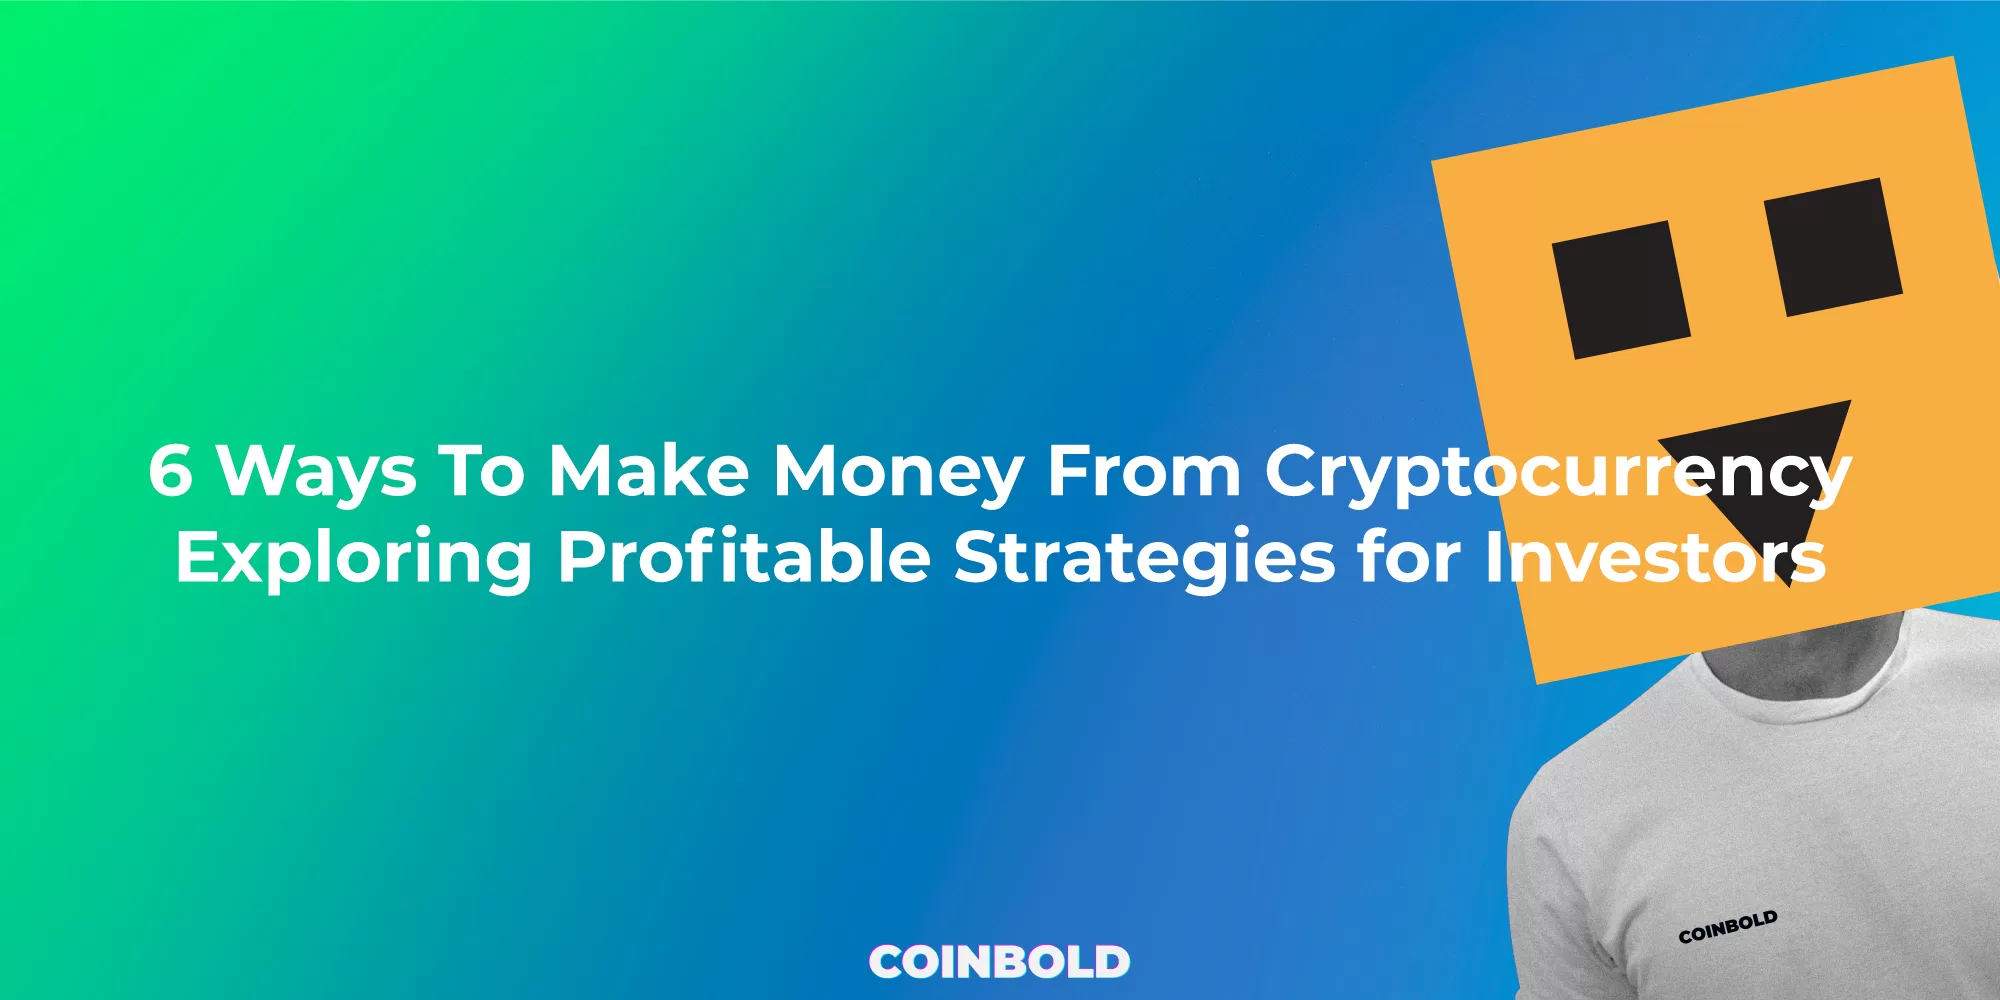 6 Ways To Make Money From Cryptocurrency Exploring Profitable Strategies for Investors